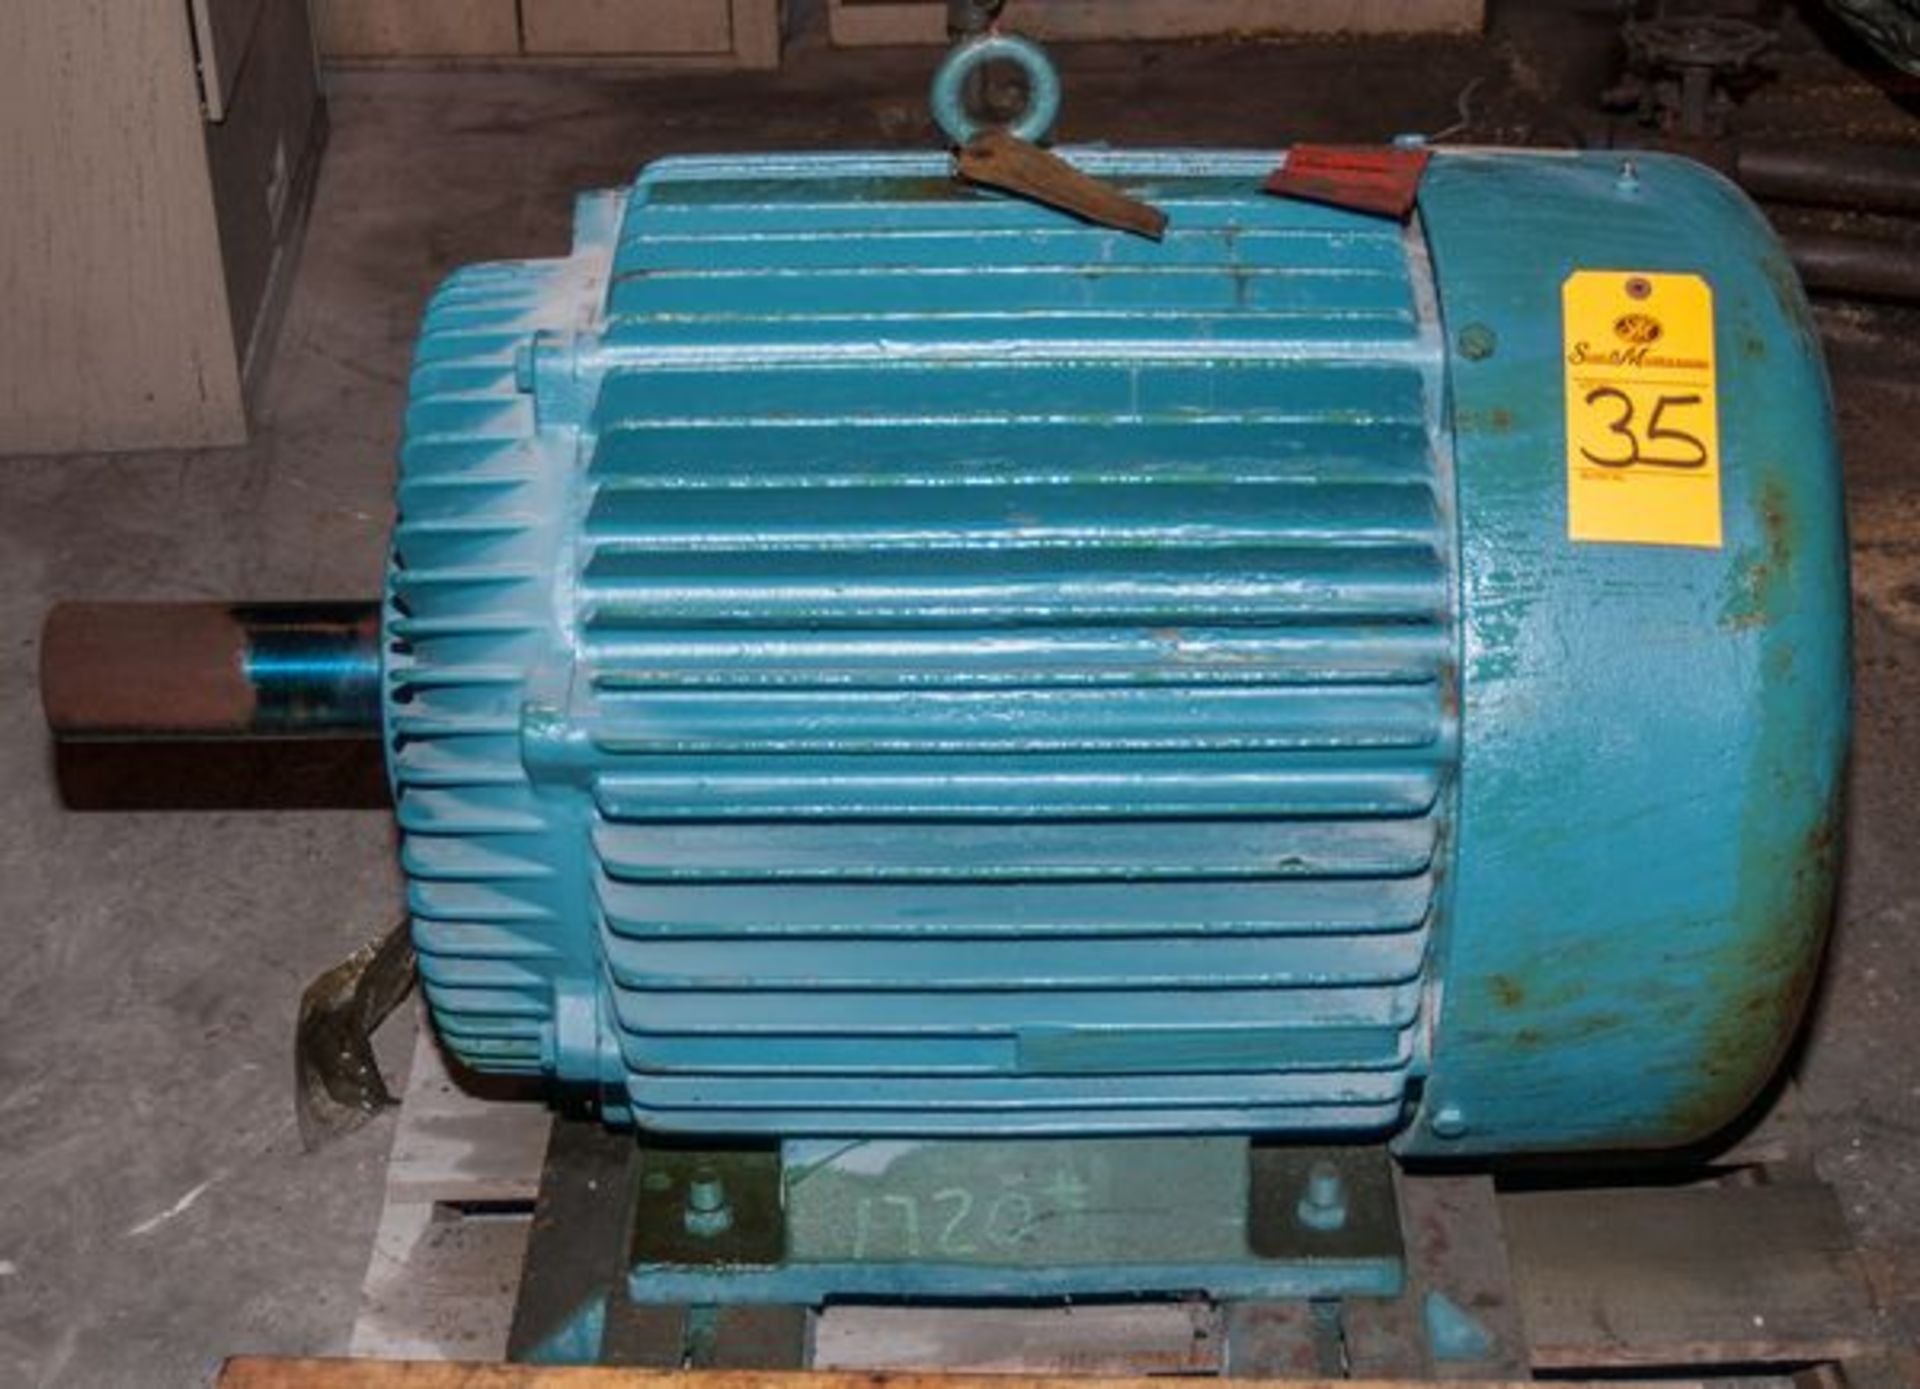 APPLIED DYNAMICS CORP. MOTOR; 125 HP.; 1800 RPM.; 460 VOLTS; 149 AMP.; 3 PH.; FRAME 444T (L-580